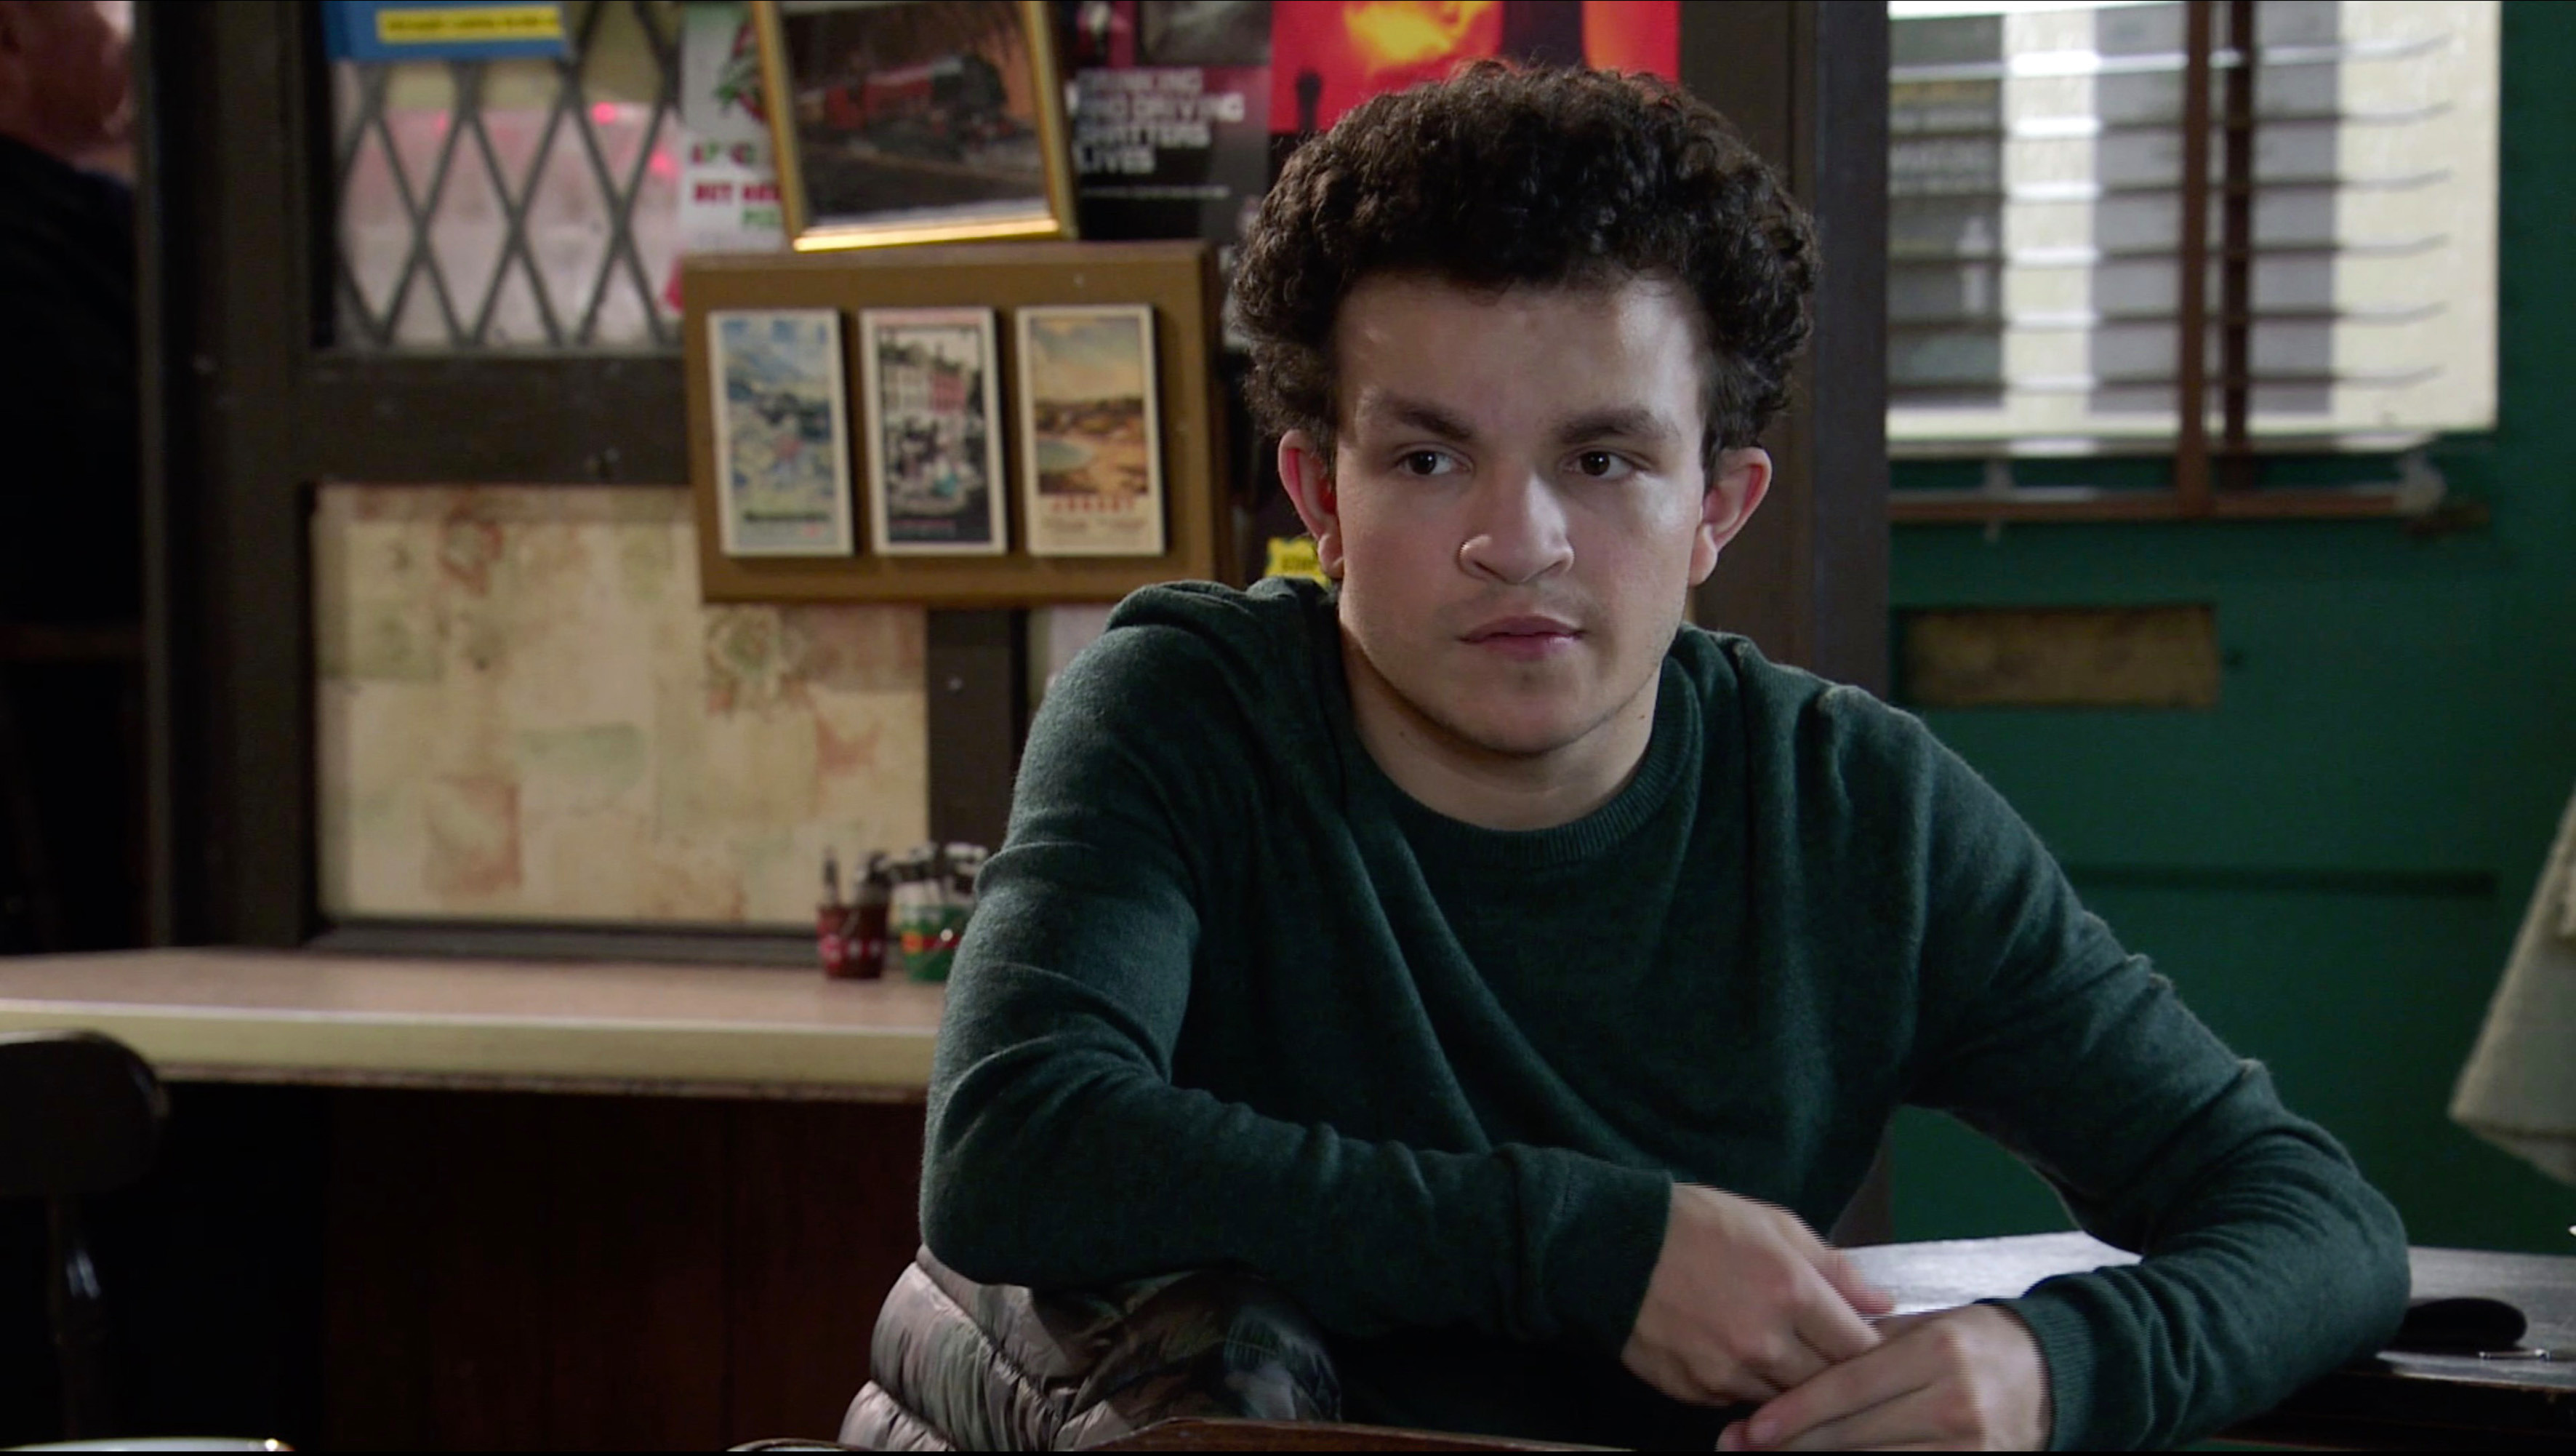 Coronation Street star Alex Bain reveals ‘dark times’ as he opens up about his mental health struggle